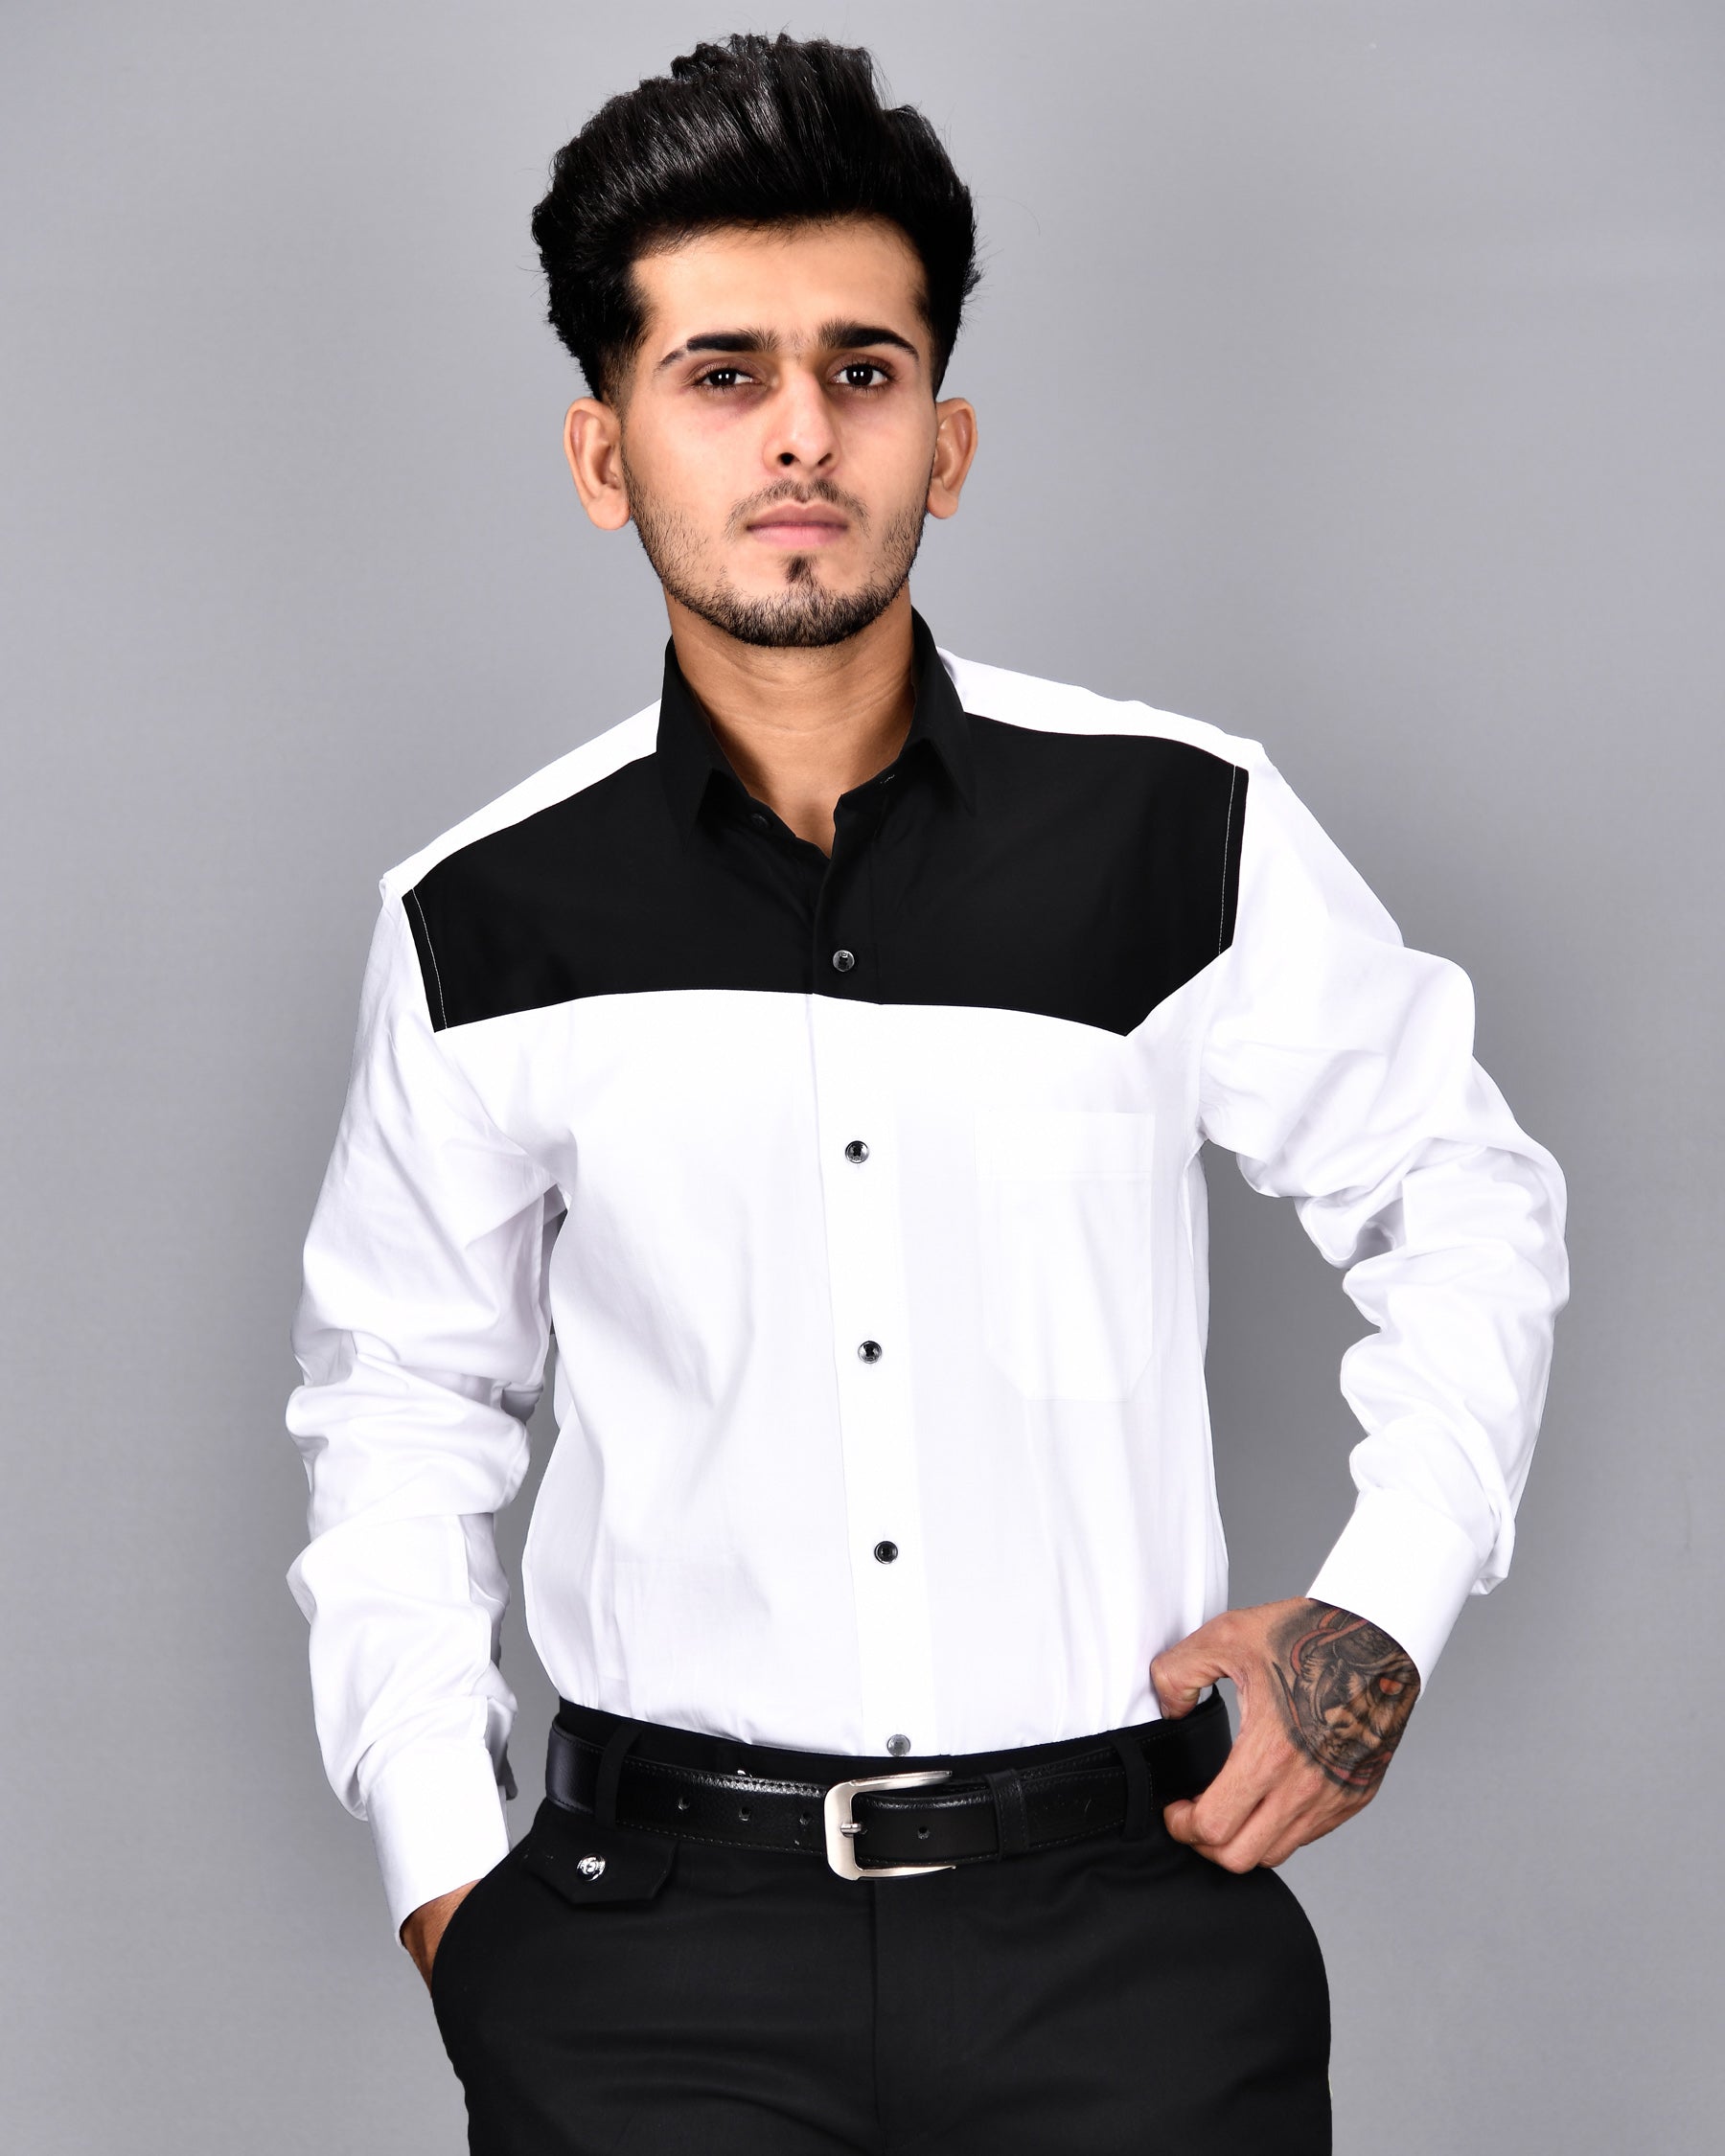 Bright White Subtle Sheen With Black Patch Giza Cotton Shirt 3084BLK-P15-38, 3084BLK-P15-H-38, 3084BLK-P15-39, 3084BLK-P15-H-39, 3084BLK-P15-40, 3084BLK-P15-H-40, 3084BLK-P15-42, 3084BLK-P15-H-42, 3084BLK-P15-44, 3084BLK-P15-H-44, 3084BLK-P15-46, 3084BLK-P15-H-46, 3084BLK-P15-48, 3084BLK-P15-H-48, 3084BLK-P15-50, 3084BLK-P15-H-50, 3084BLK-P15-52, 3084BLK-P15-H-52